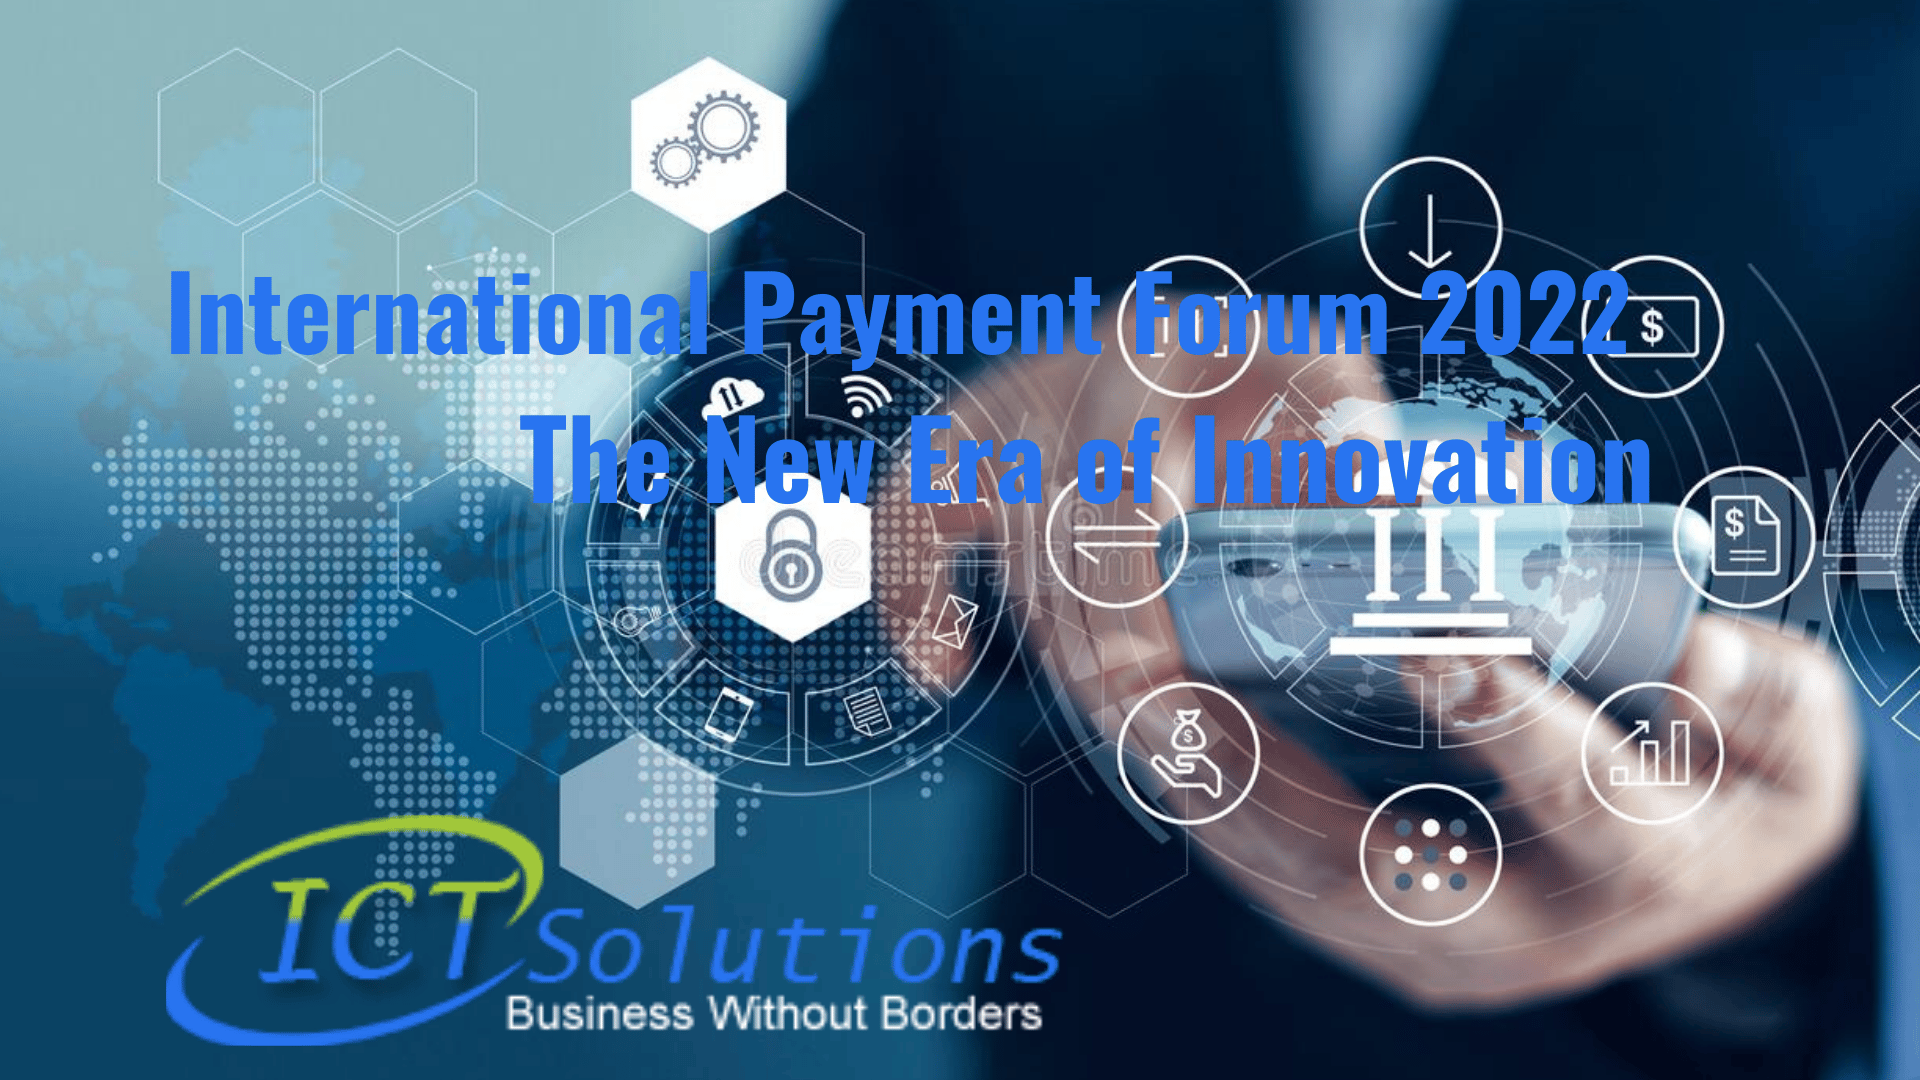 5th Annual International Payment and Innovation Forum 2022